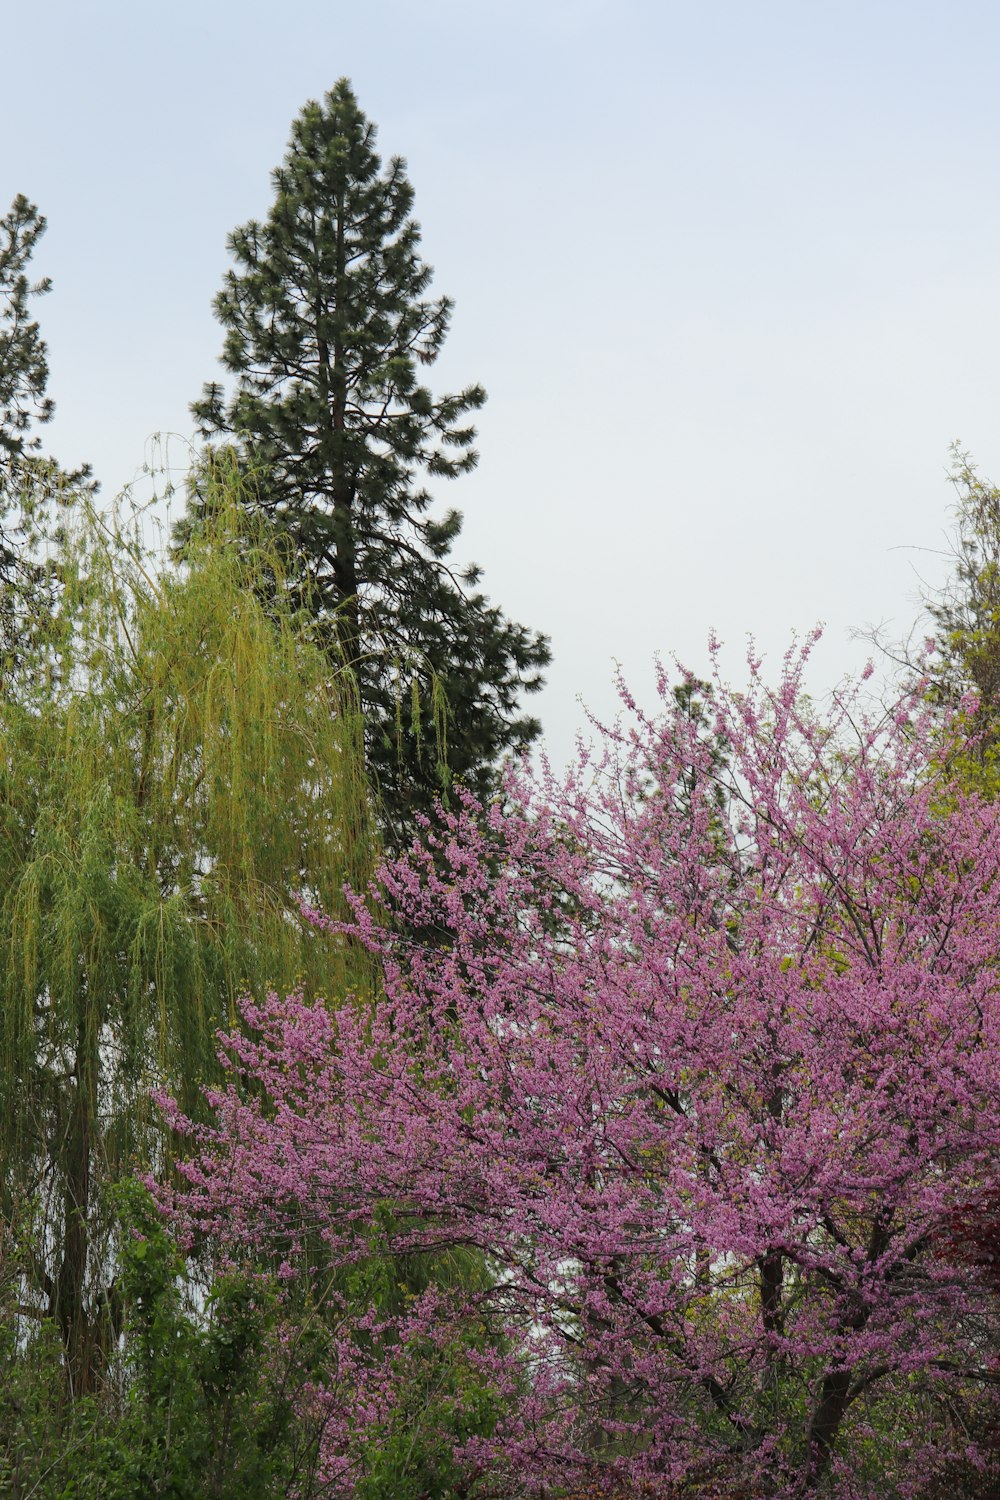 trees with purple flowers in the foreground and green trees in the background